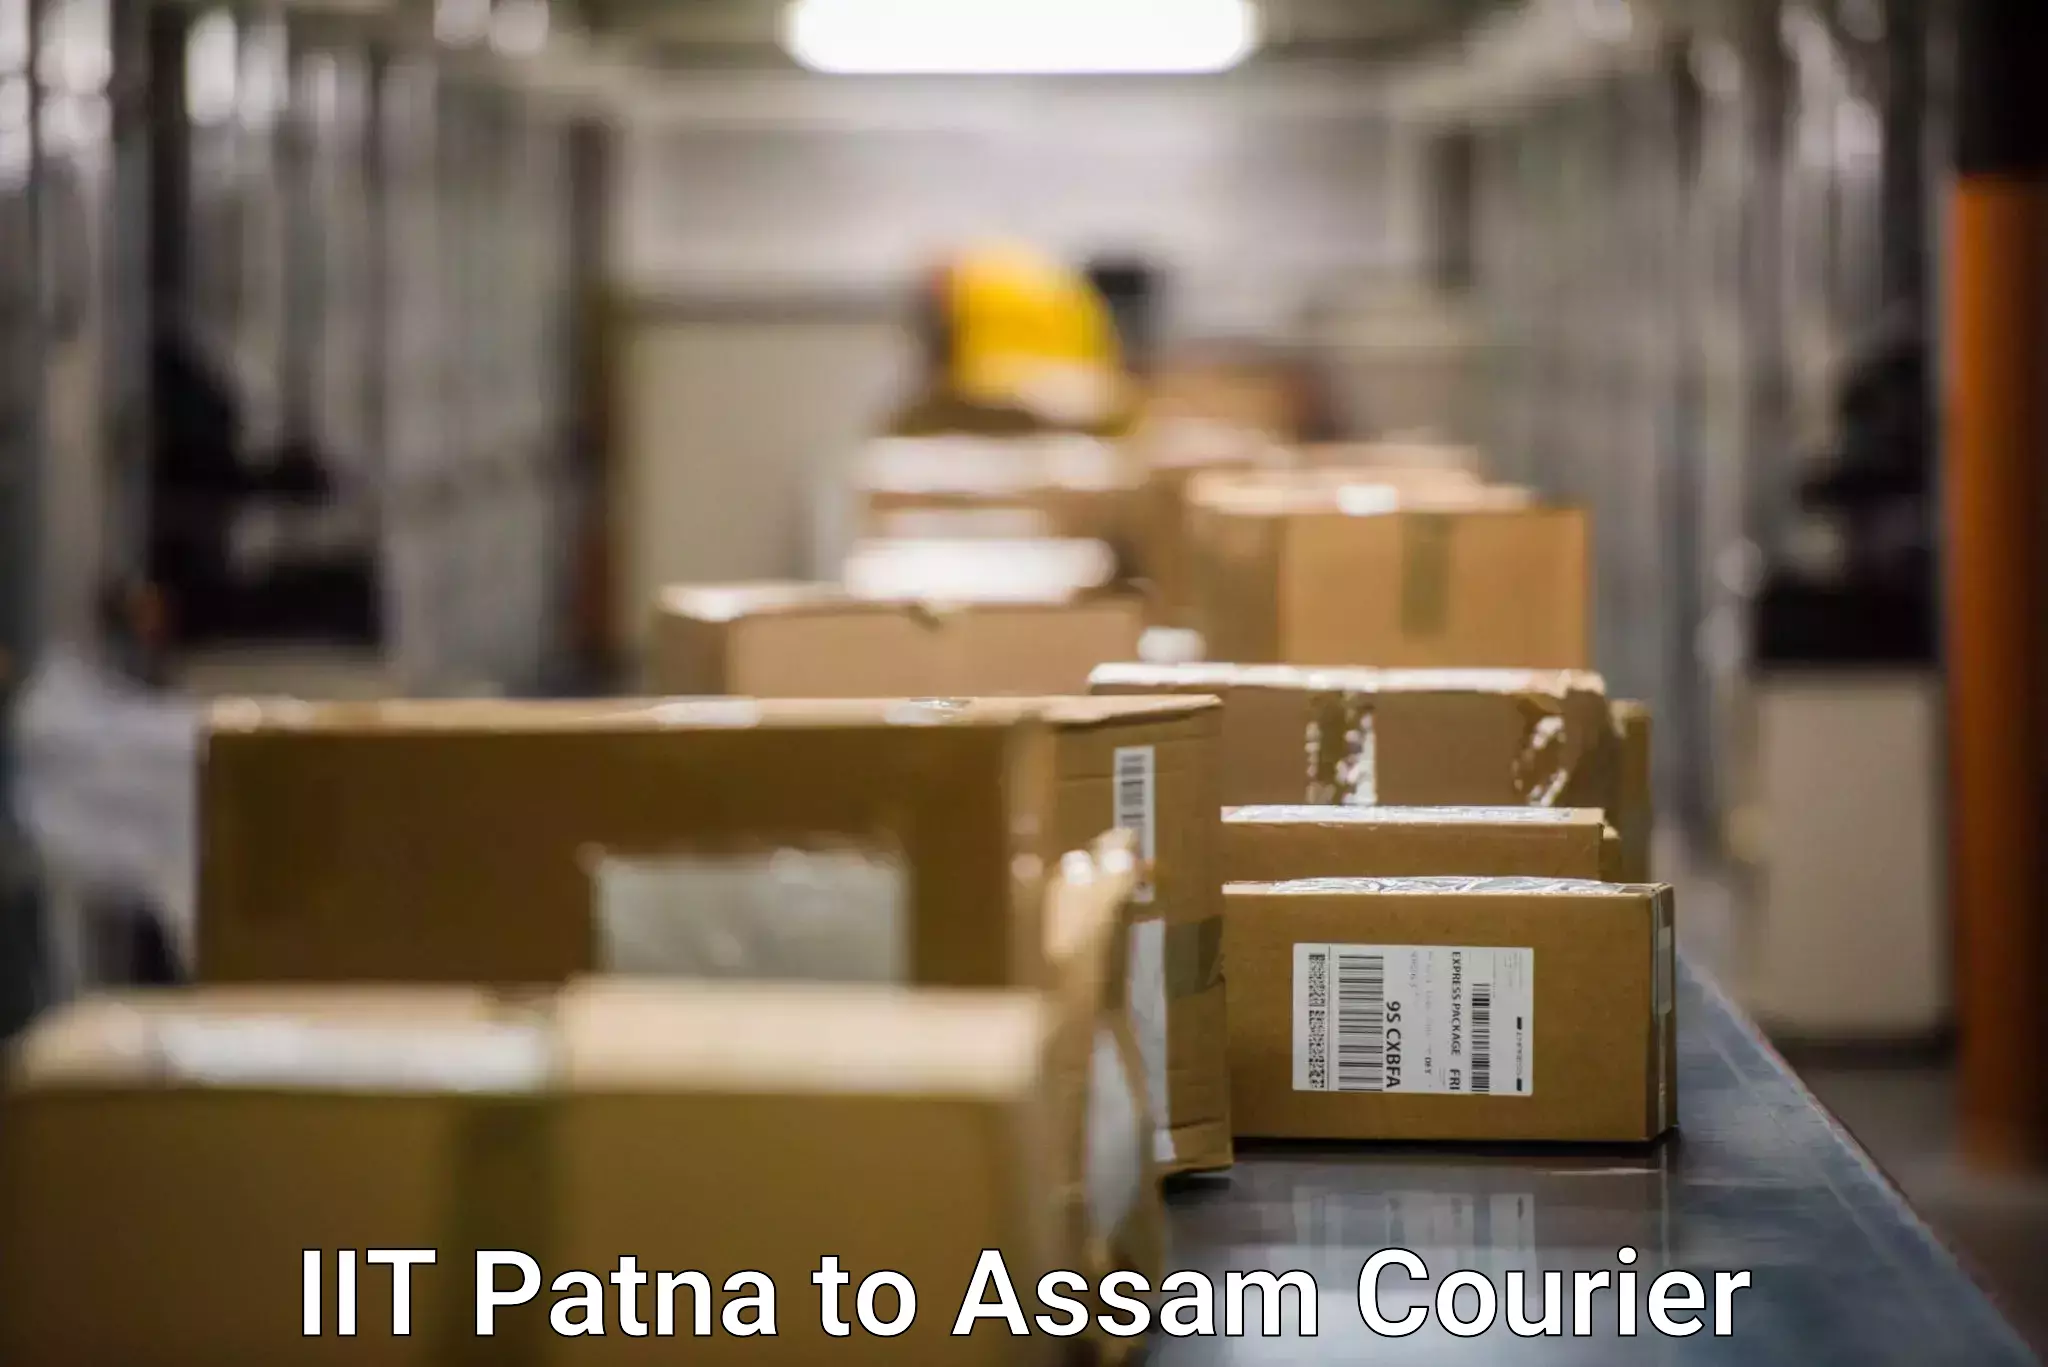 Courier rate comparison in IIT Patna to Udalguri